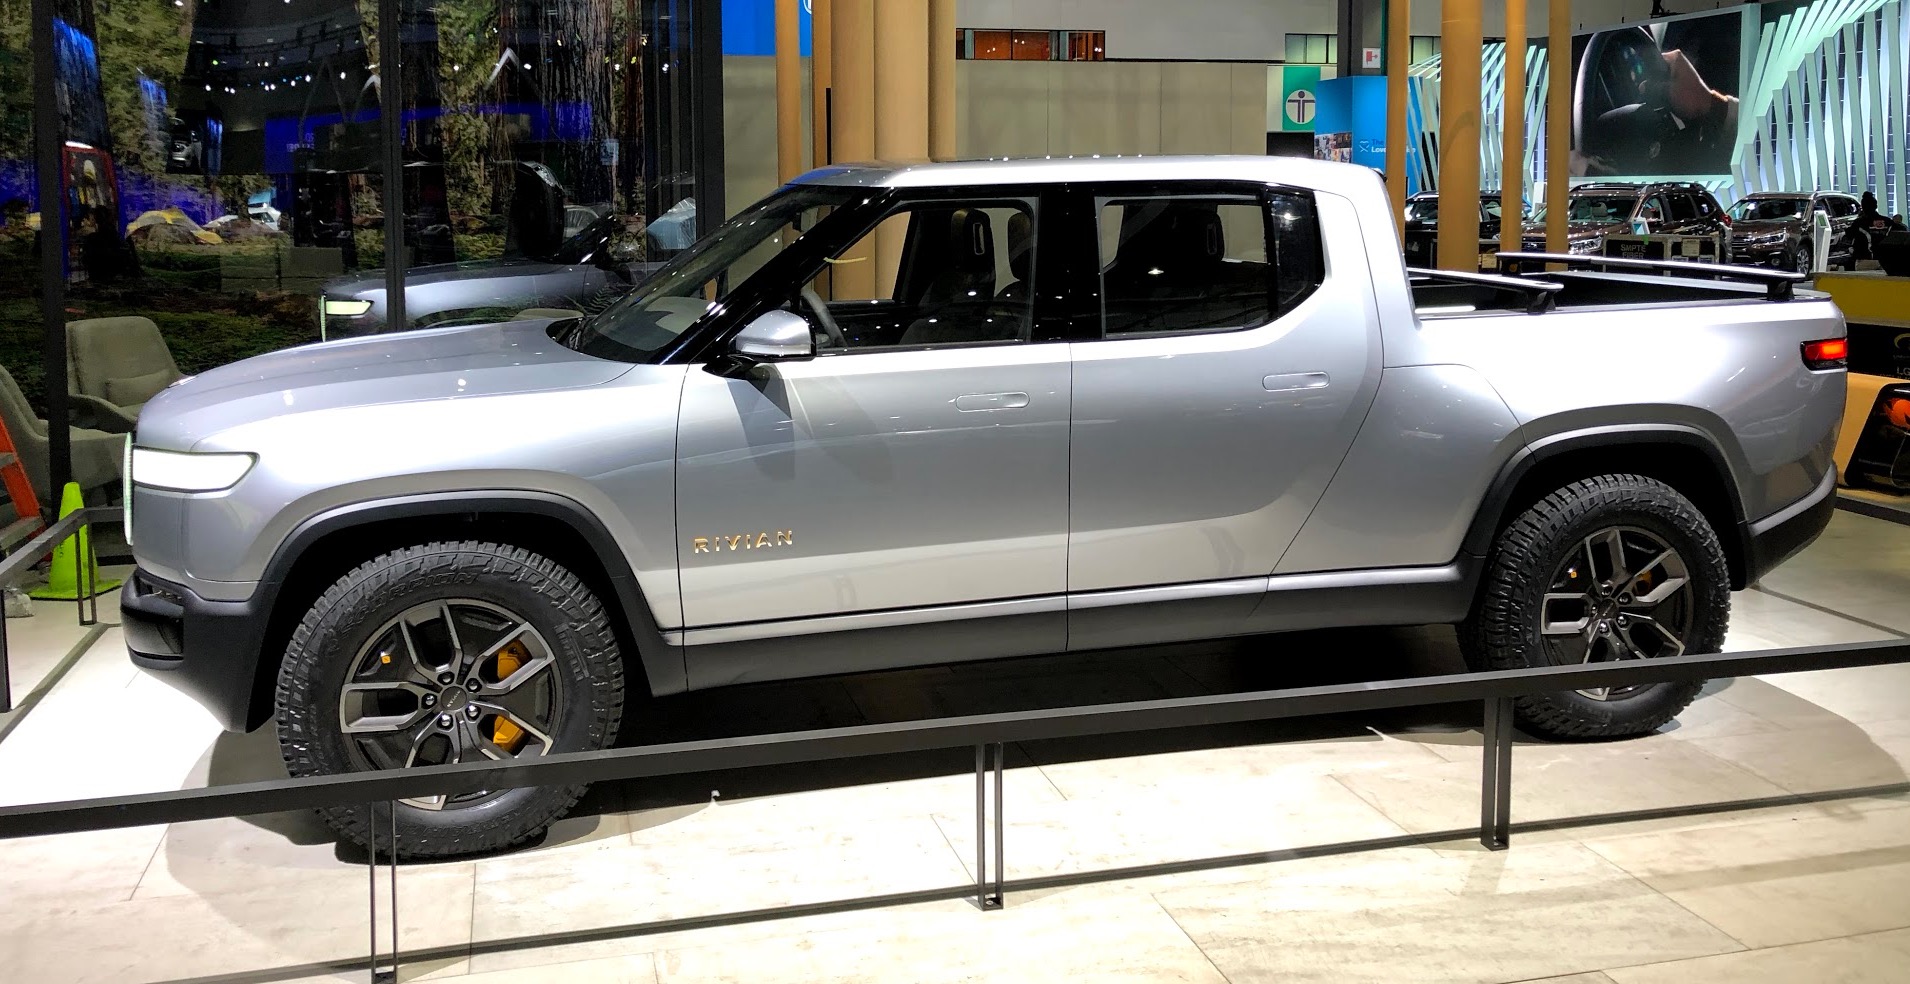 Closer look at Rivian's R1T all-electric pickup truck and why I ordered it